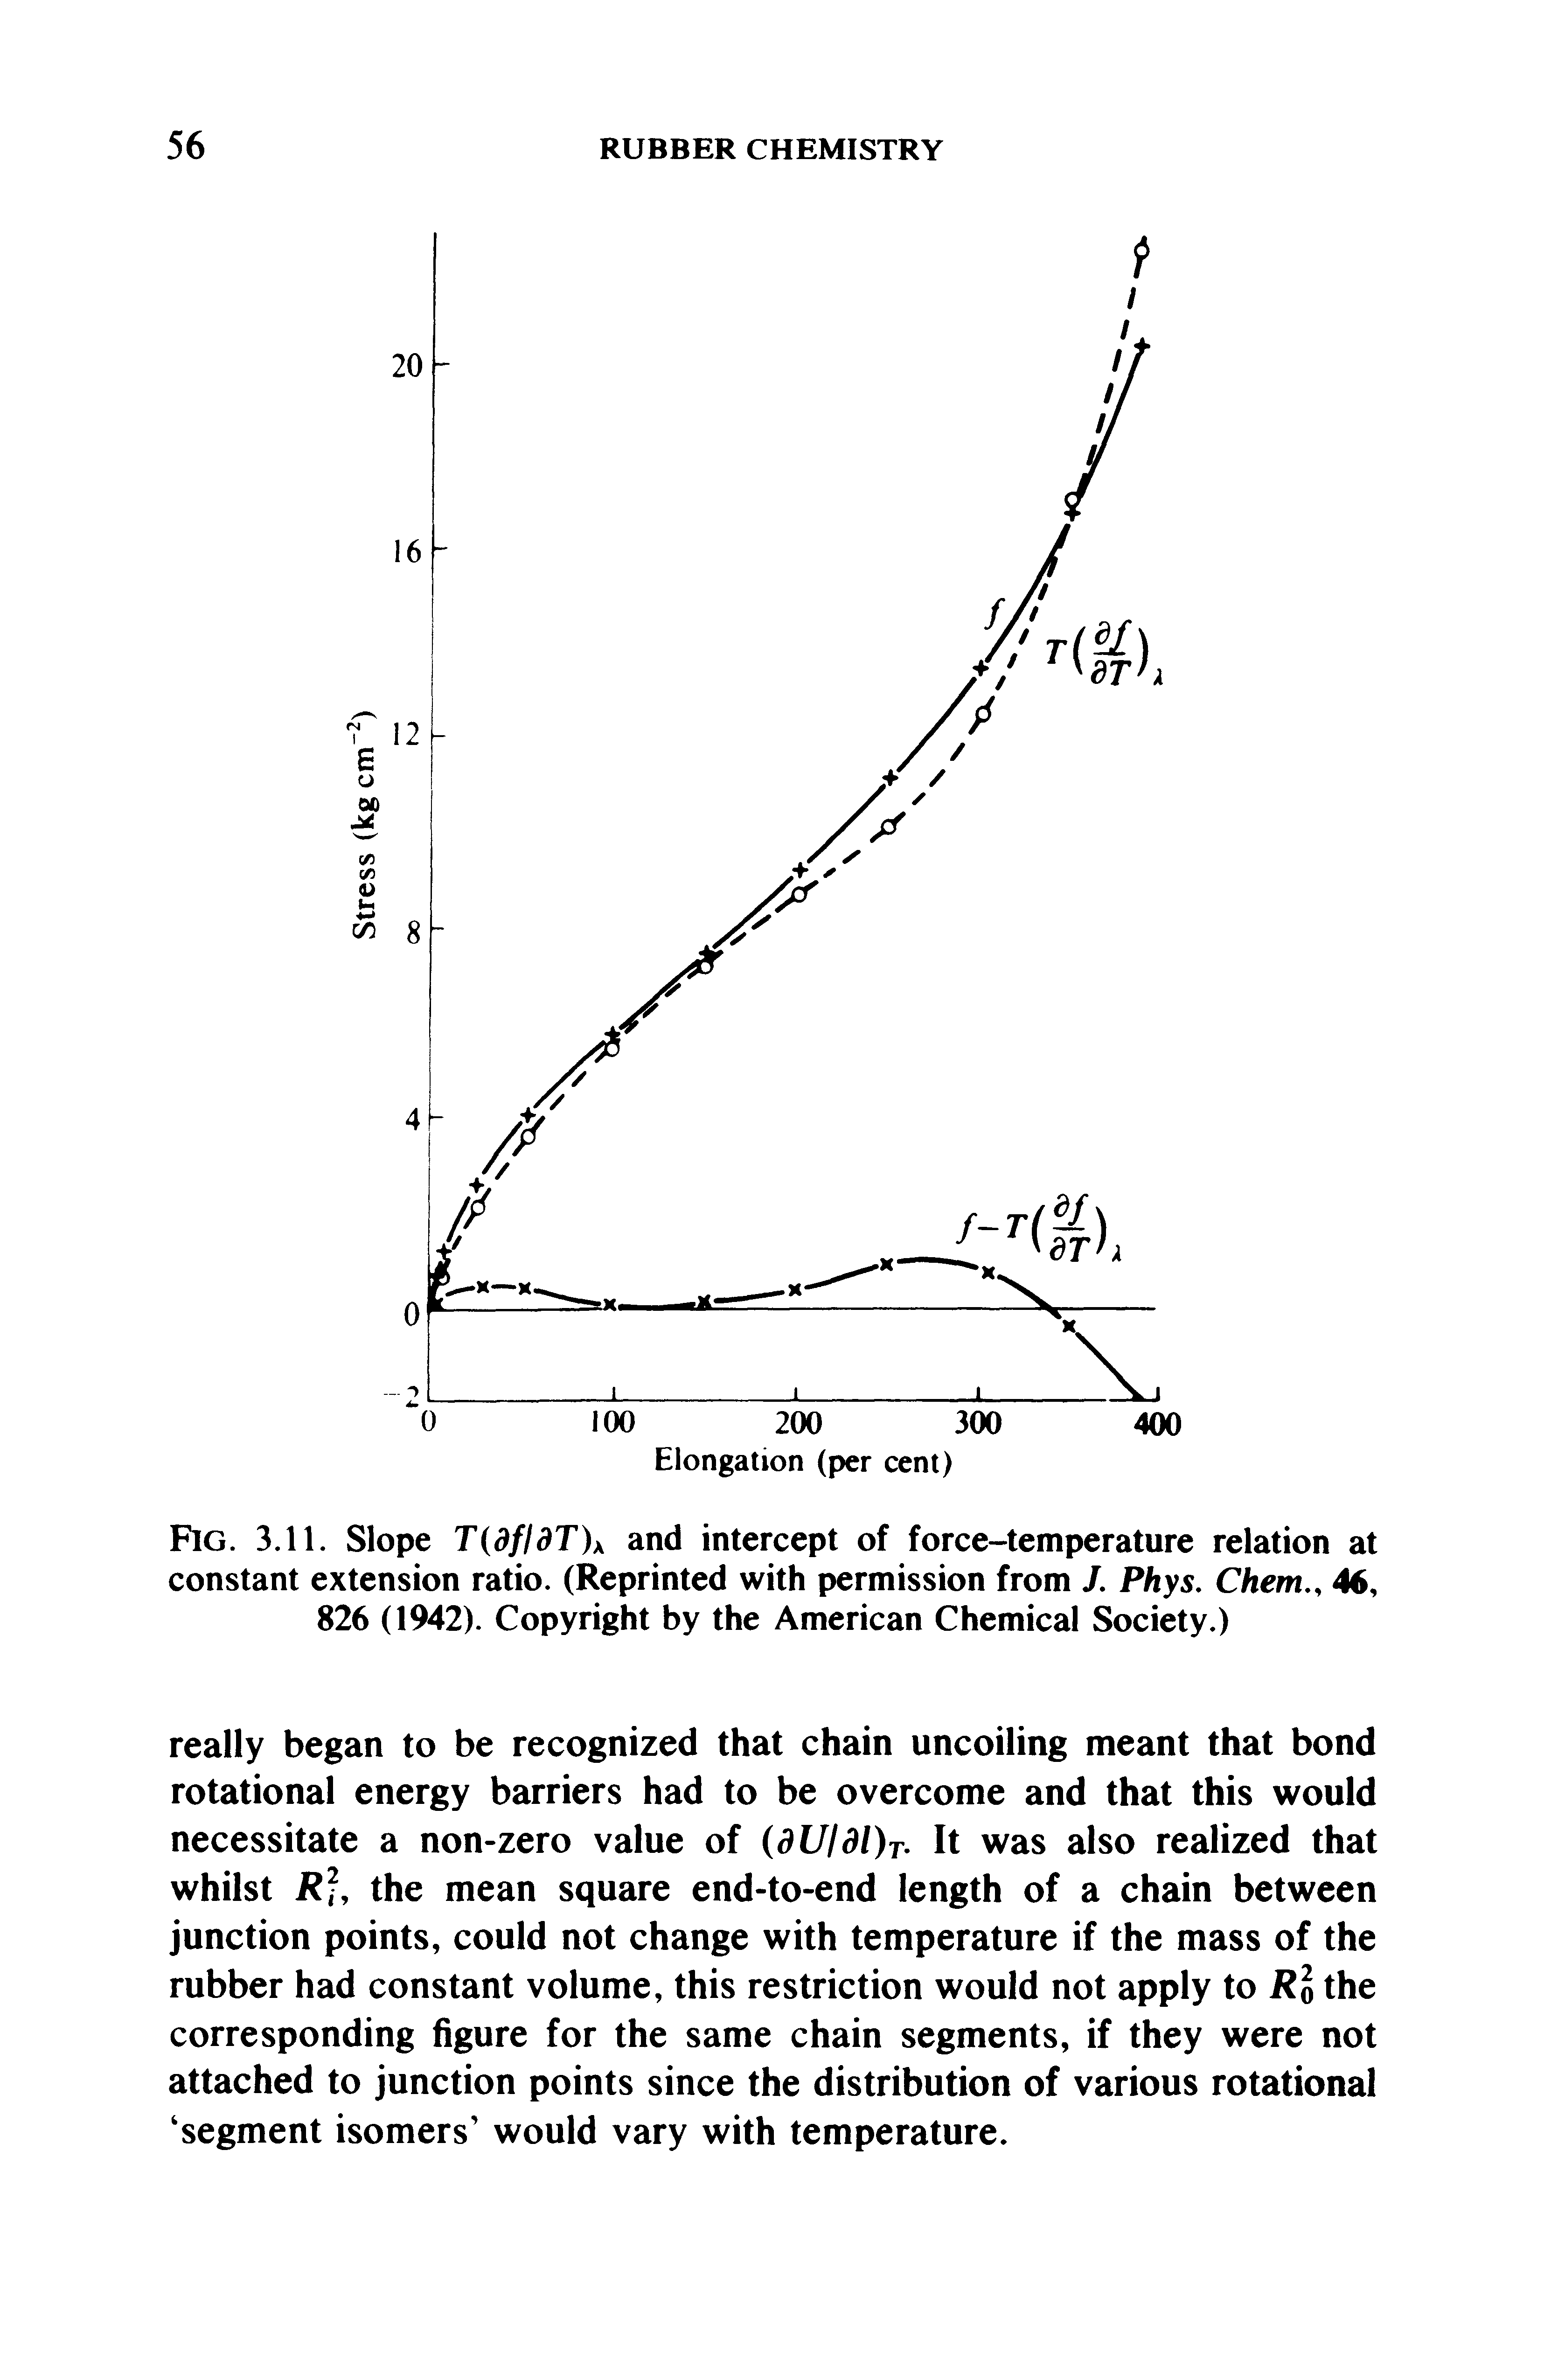 Fig. 3.11. Slope T(dfldT)x and intercept of force-temperature relation at constant extension ratio. (Reprinted with permission from /. Phys, Ghent, 46, 826 (1942). Copyright by the American Chemical Society.)...